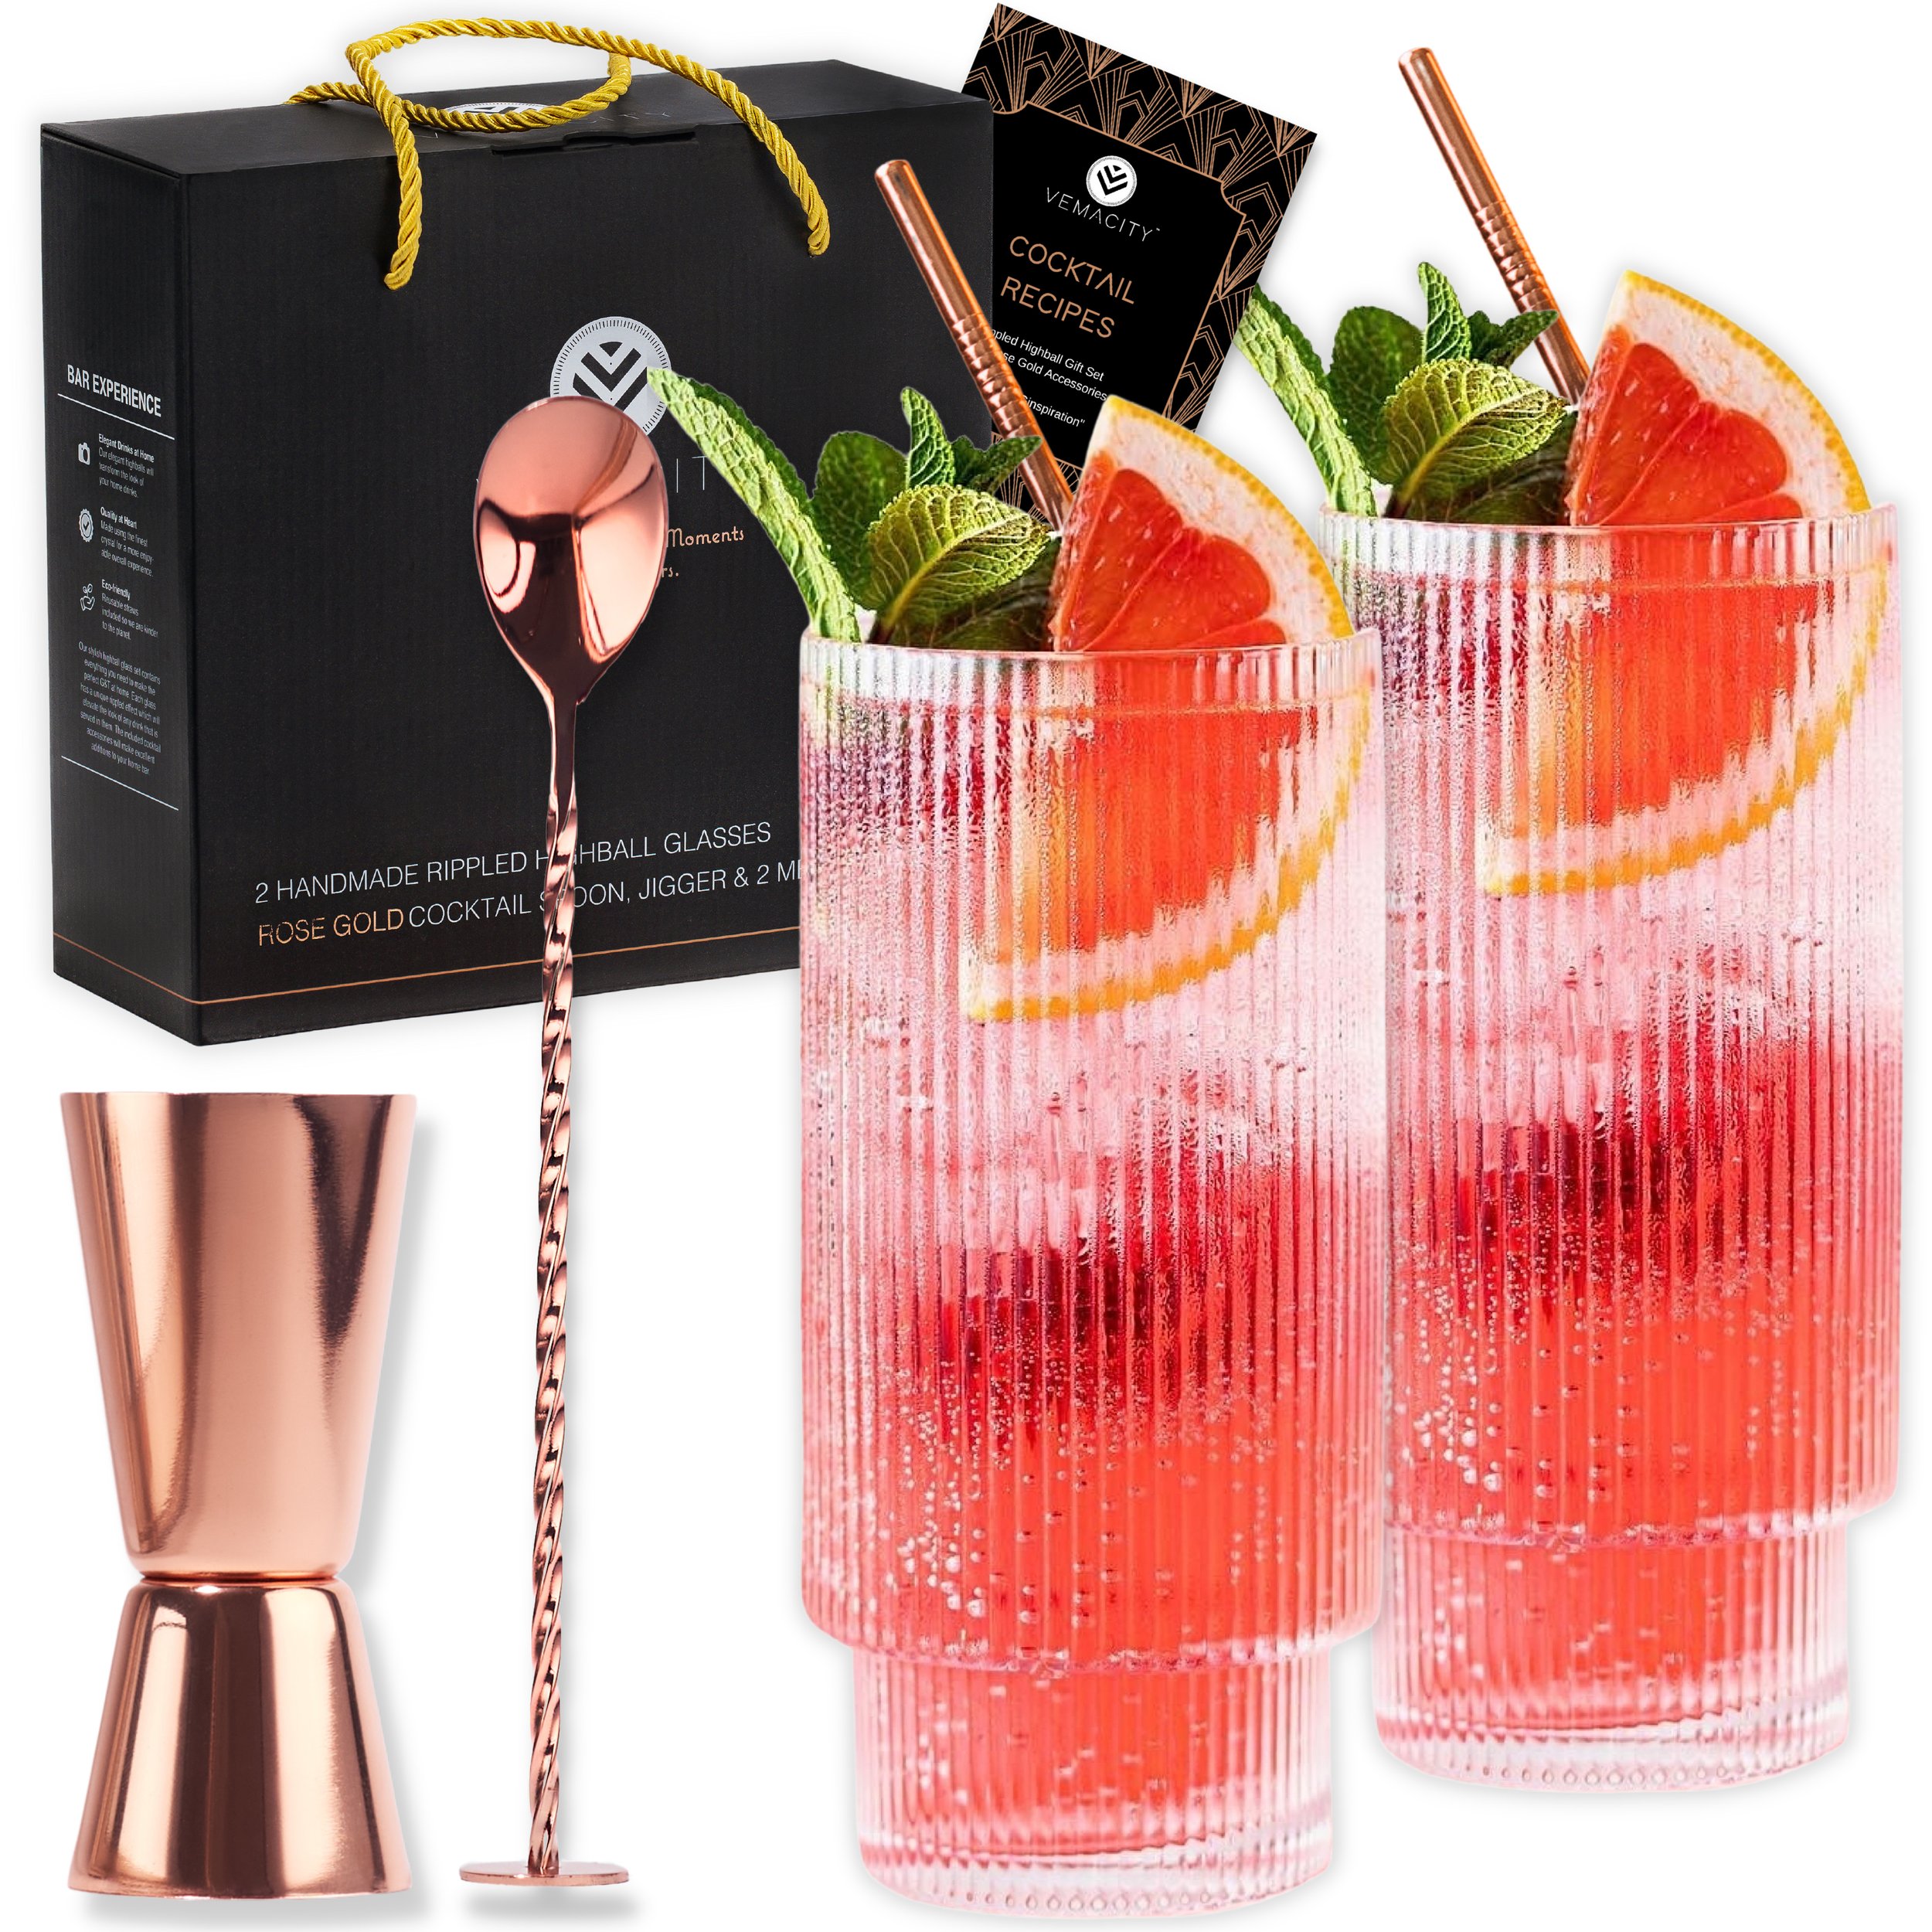 Gin Glasses for Gin Lovers Set of 2 Handmade G&T Glasses 700ml Rose Gold  Pro Cocktail Spoon and Jigger Gift Boxed 